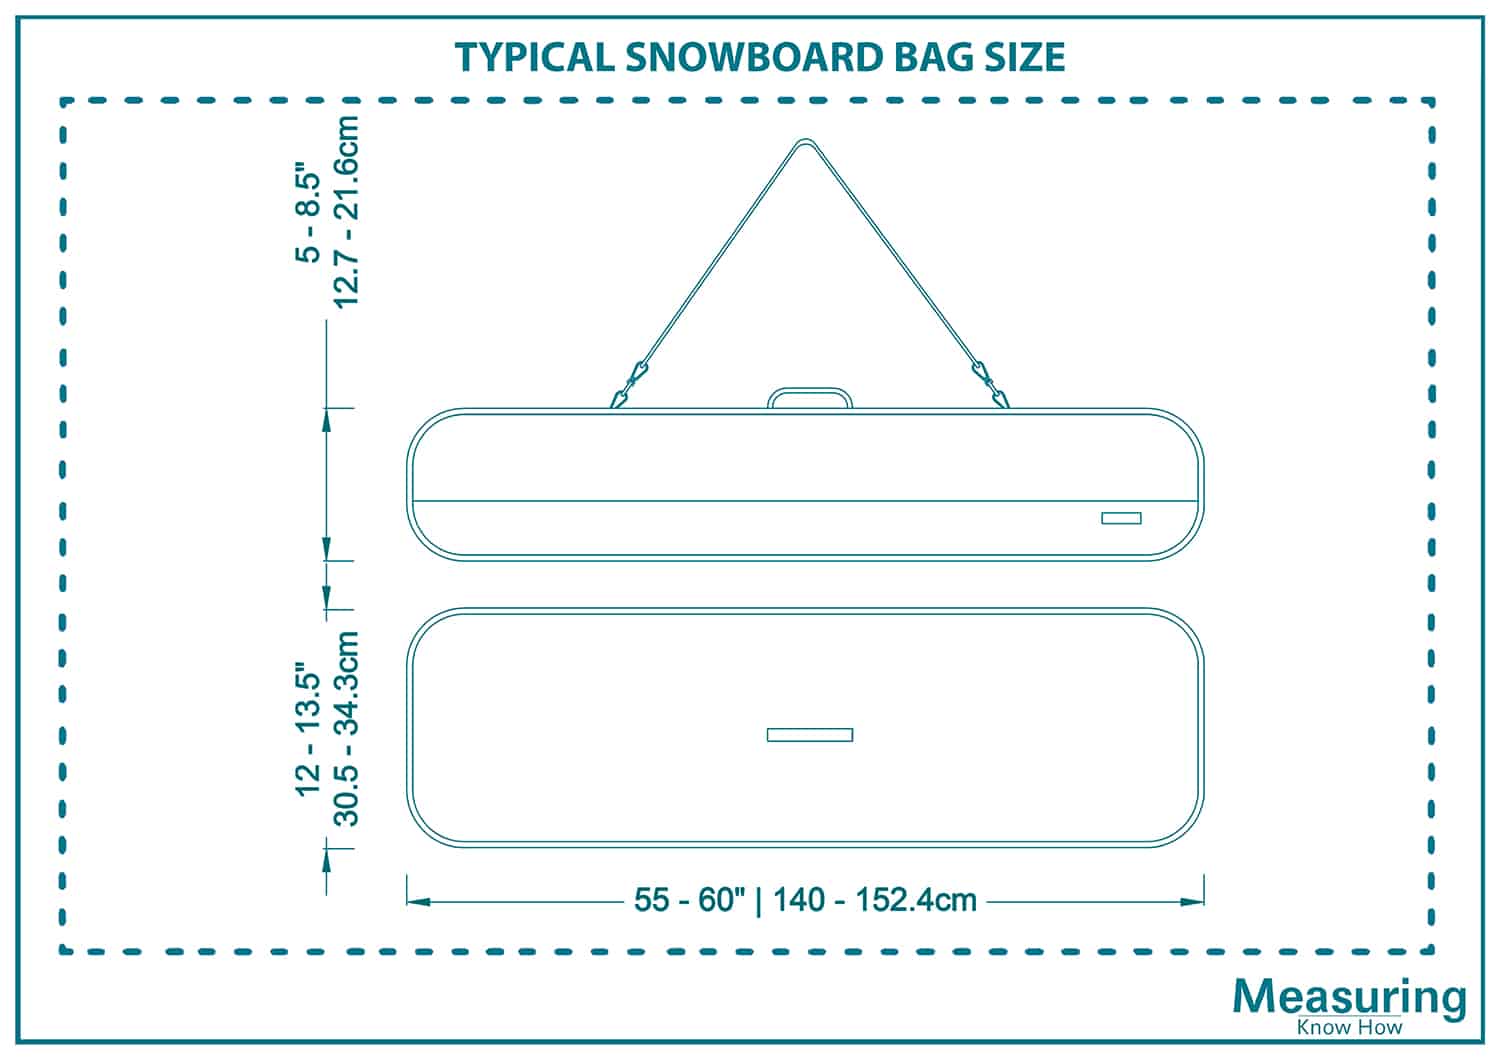 What Are the Snowboard Bag Sizes? MeasuringKnowHow